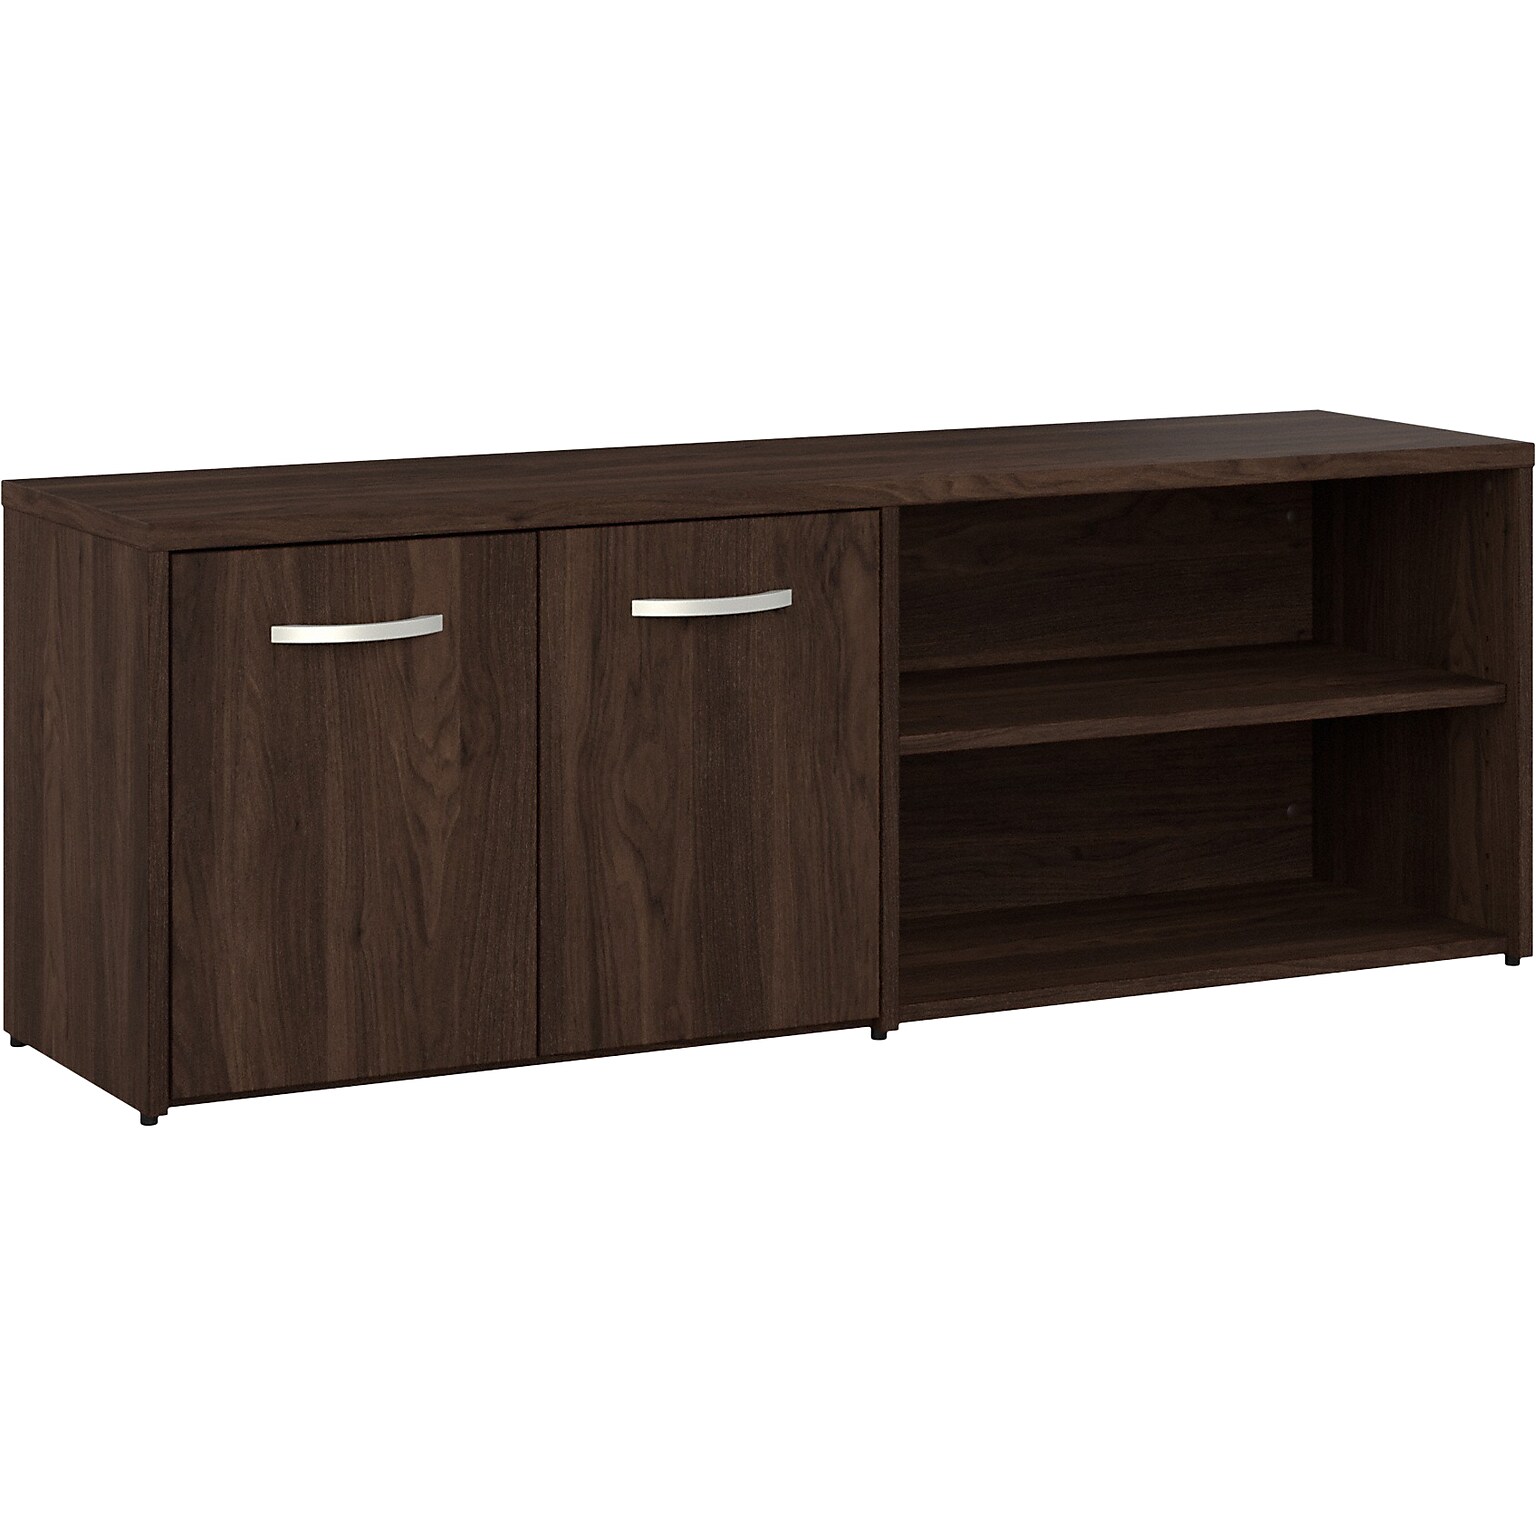 Bush Business Furniture Studio C Low Storage Cabinet with Doors and Shelves, Black Walnut (SCS160BW)